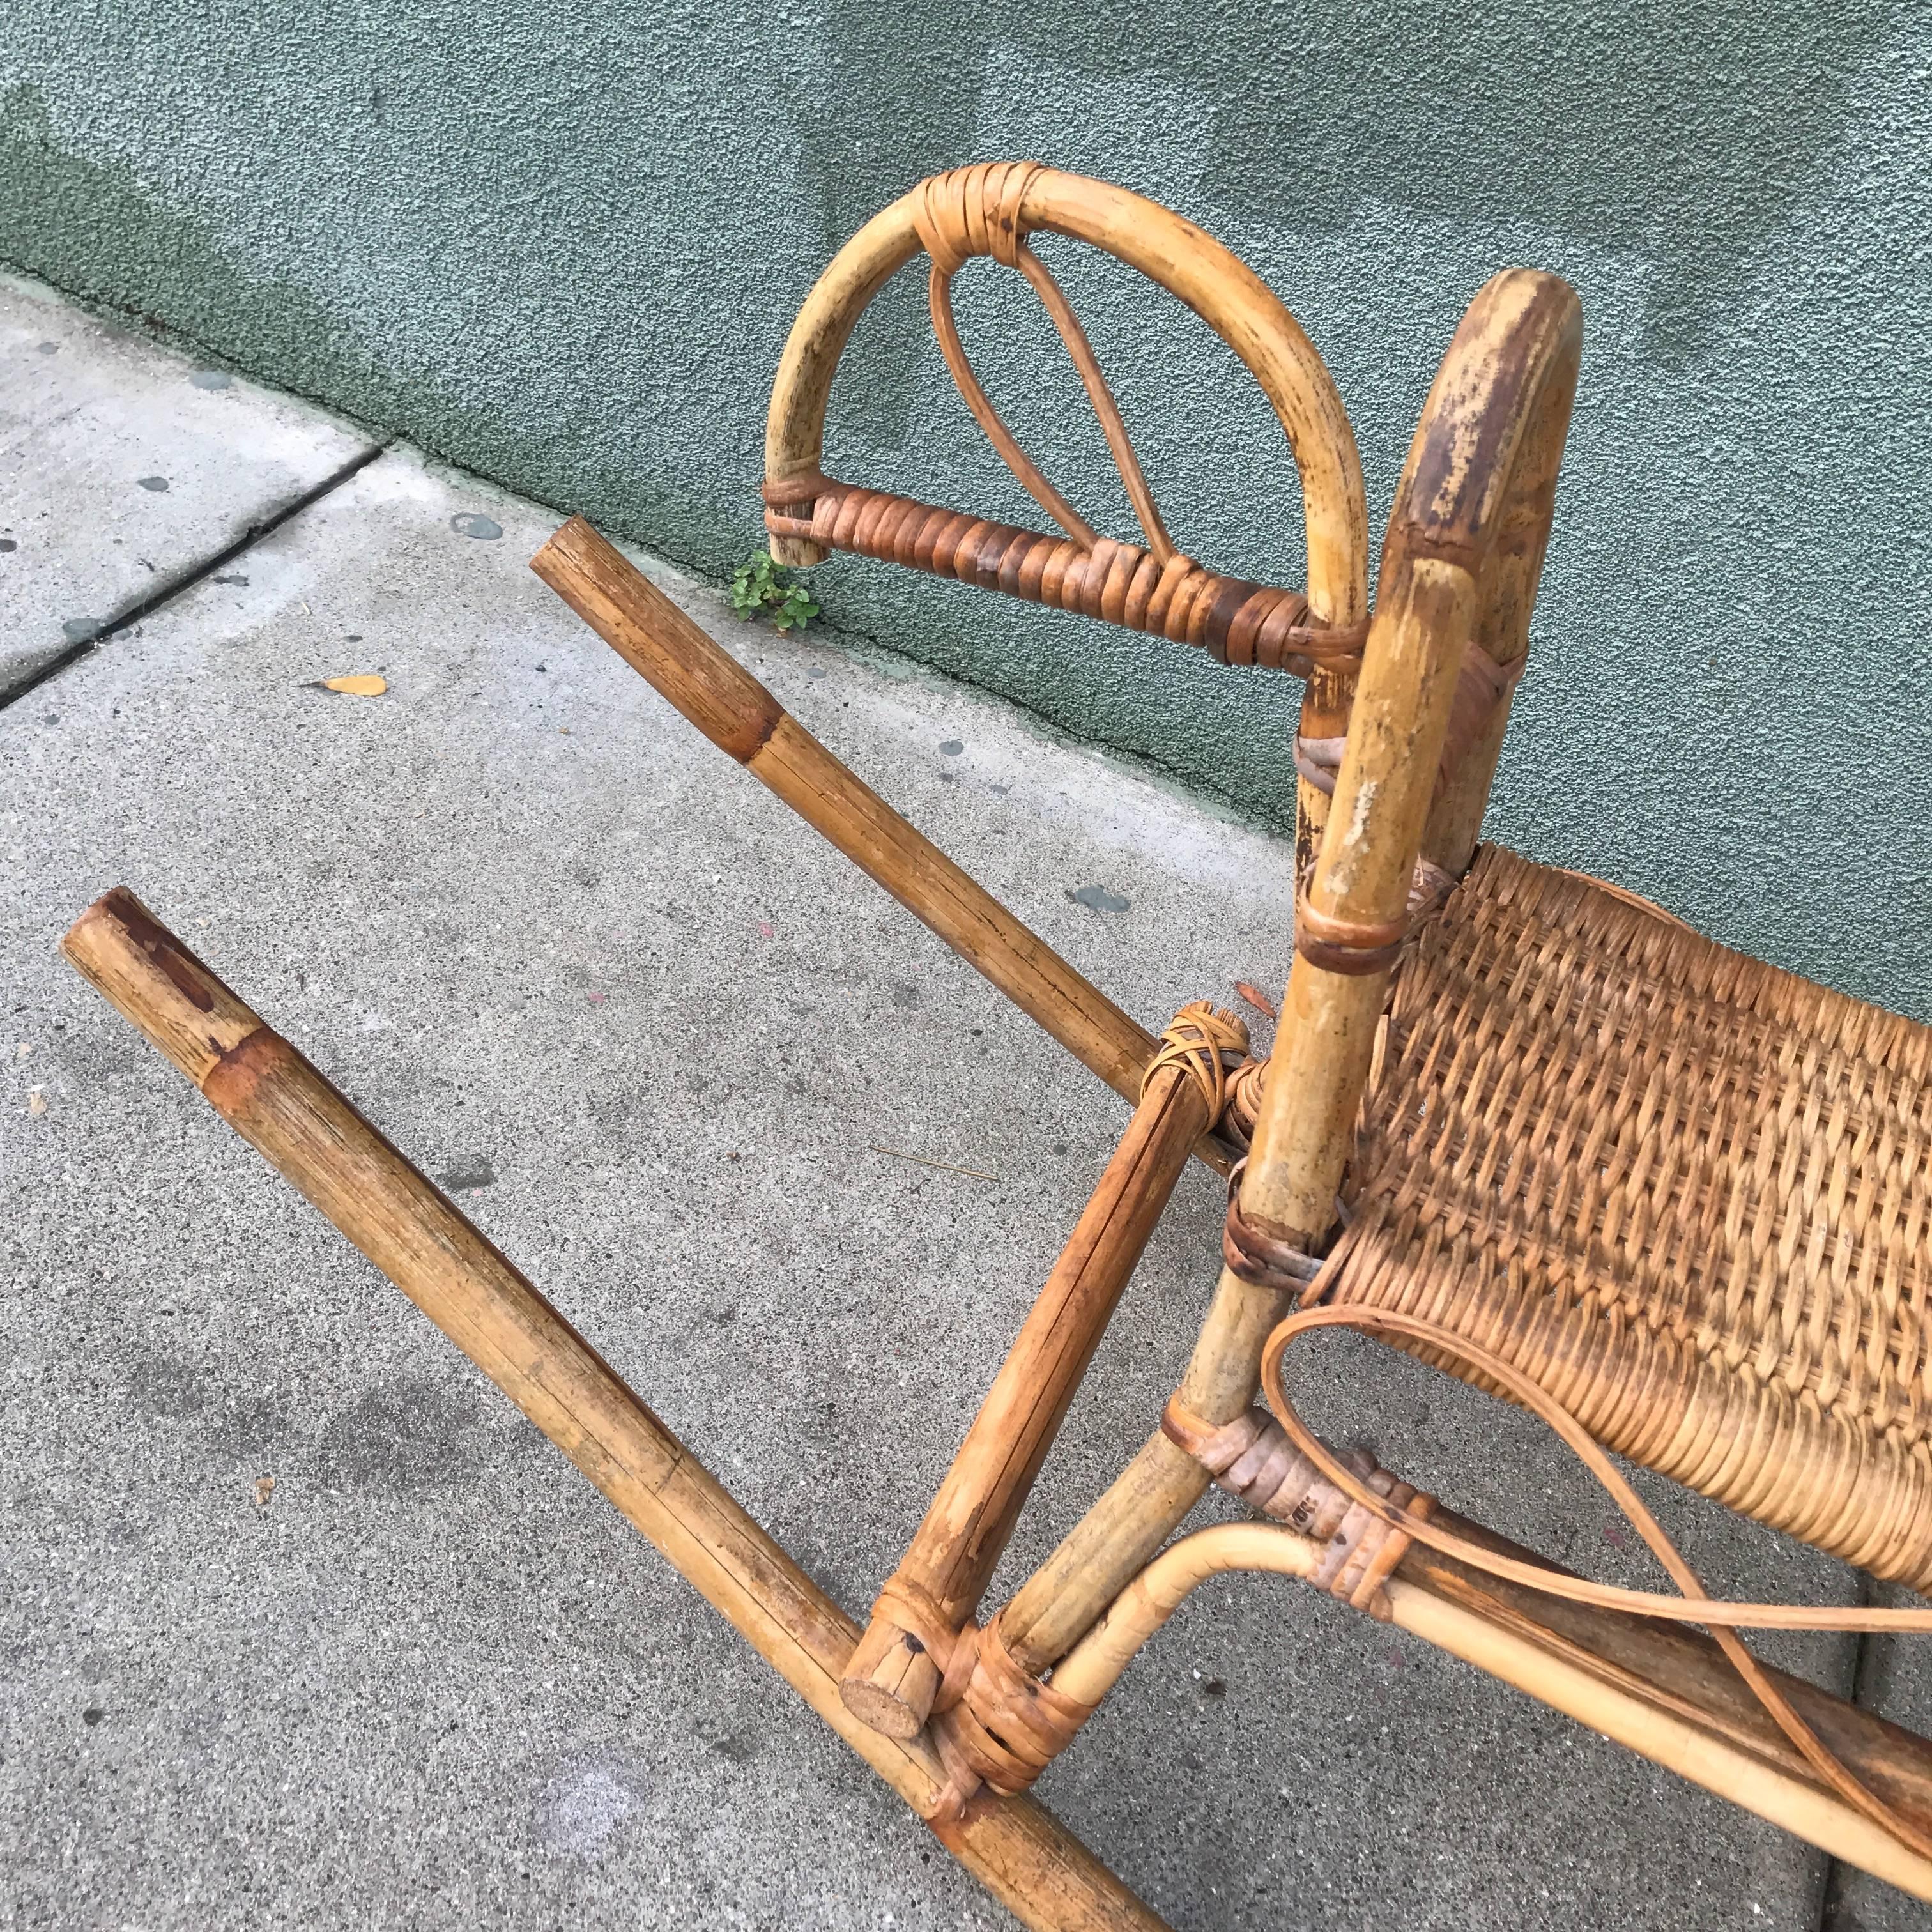 Woven Rattan Child's Rocking Horse For Sale